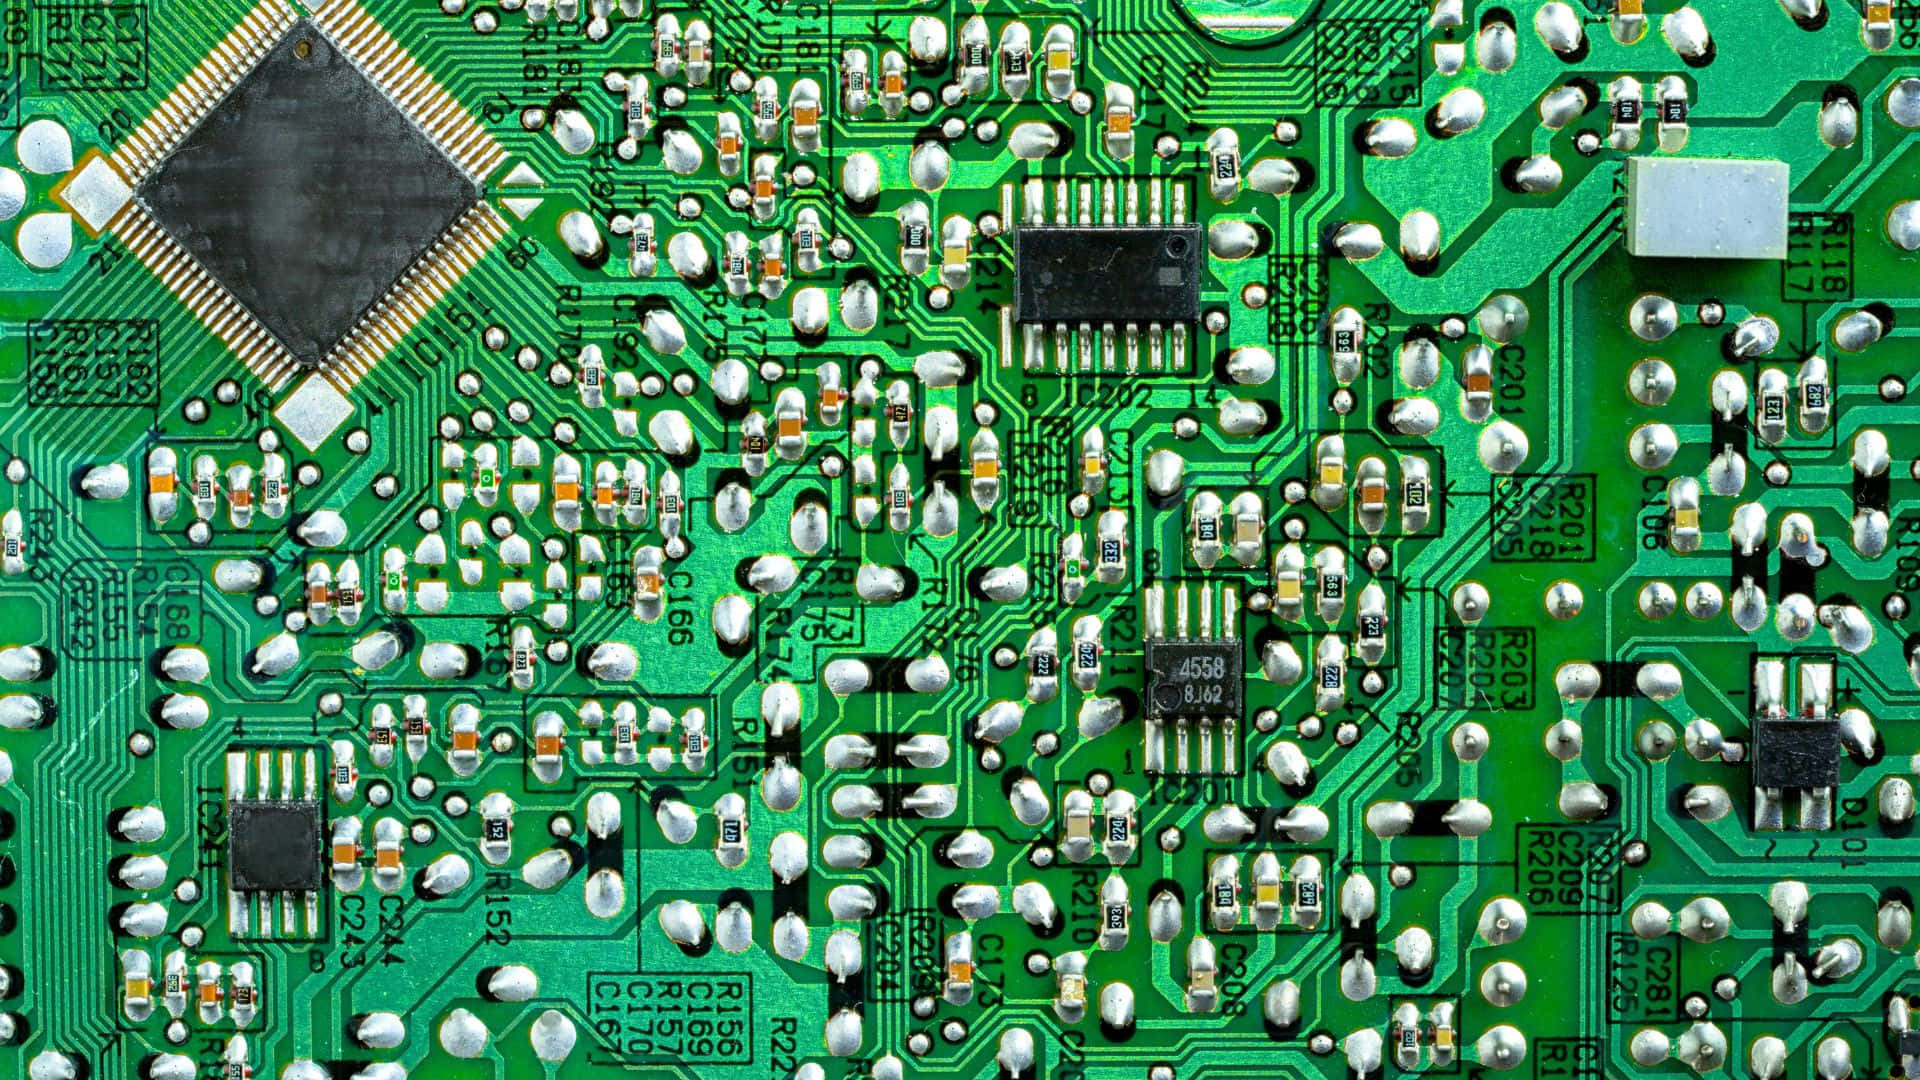 "Highly detailed and finely crafted circuit board components"